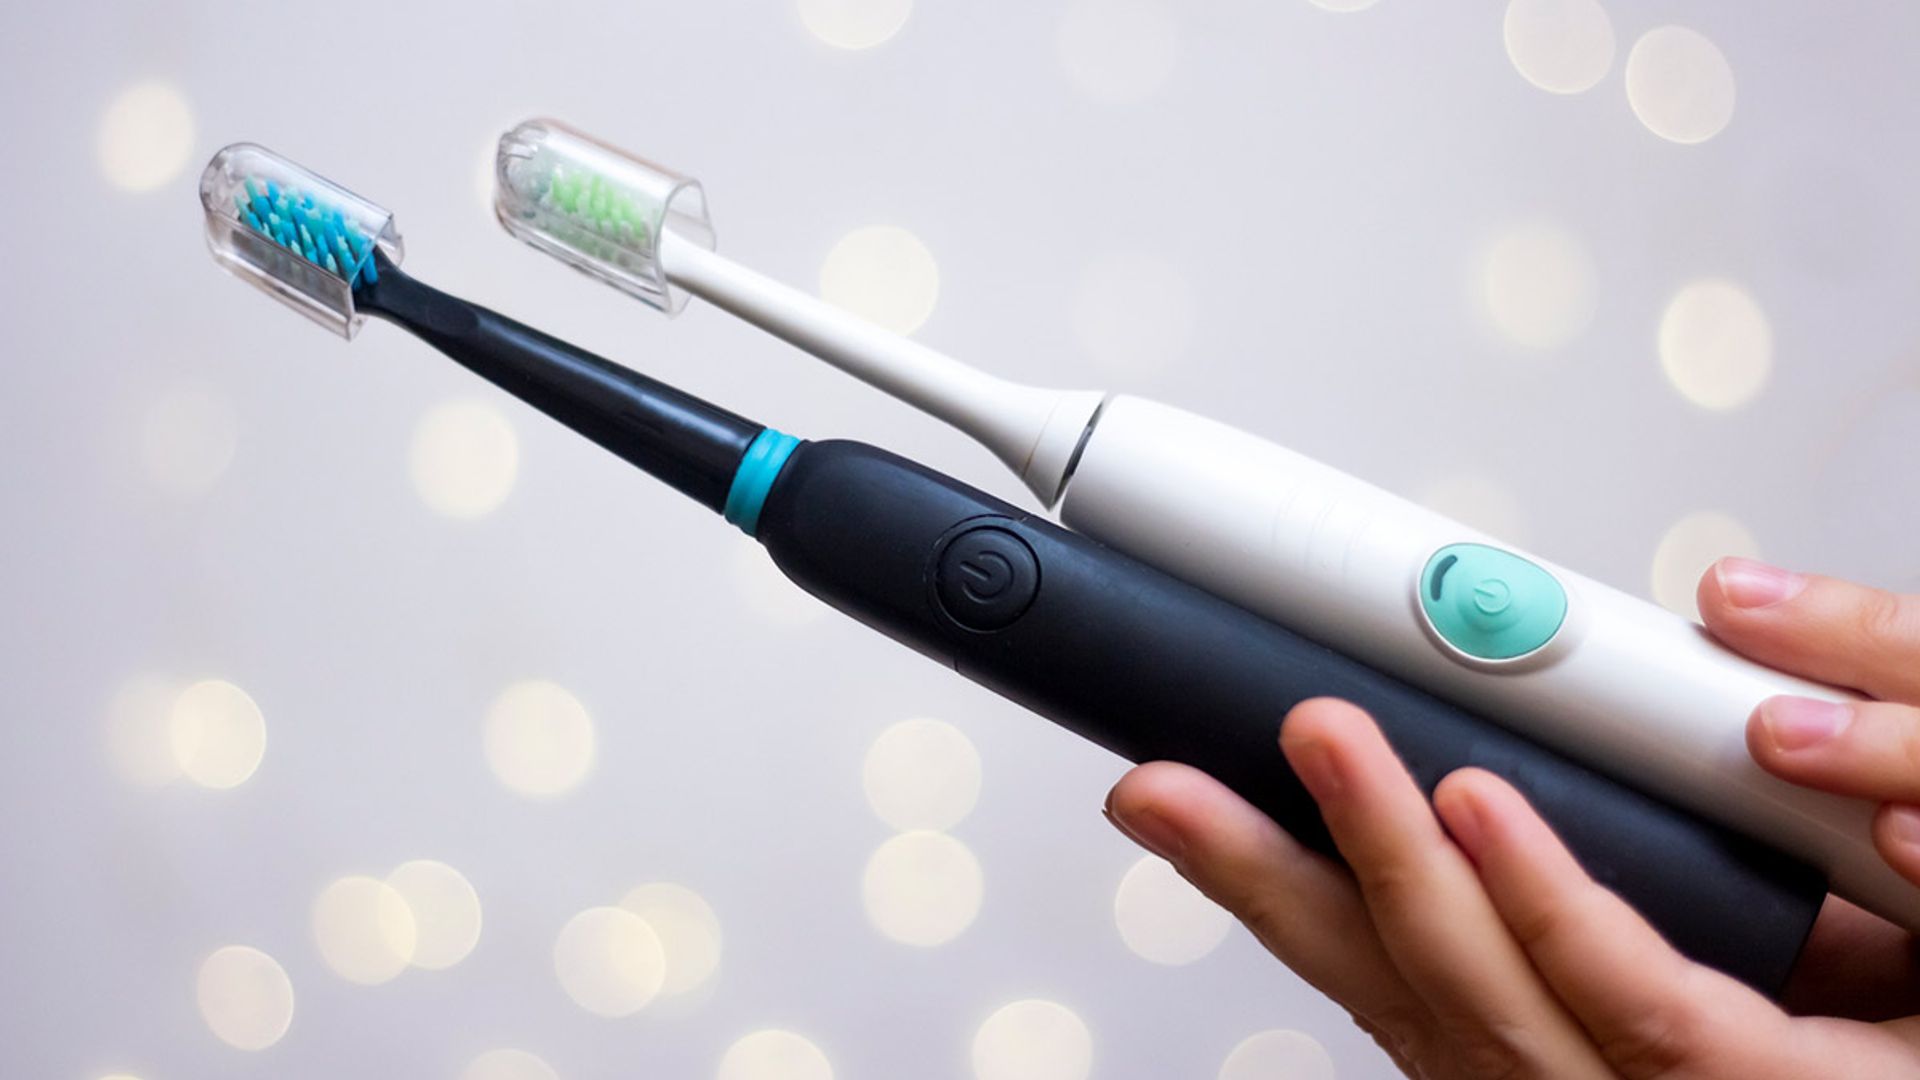 Review: I Tried the Philips Sonicare 5100 Toothbrush